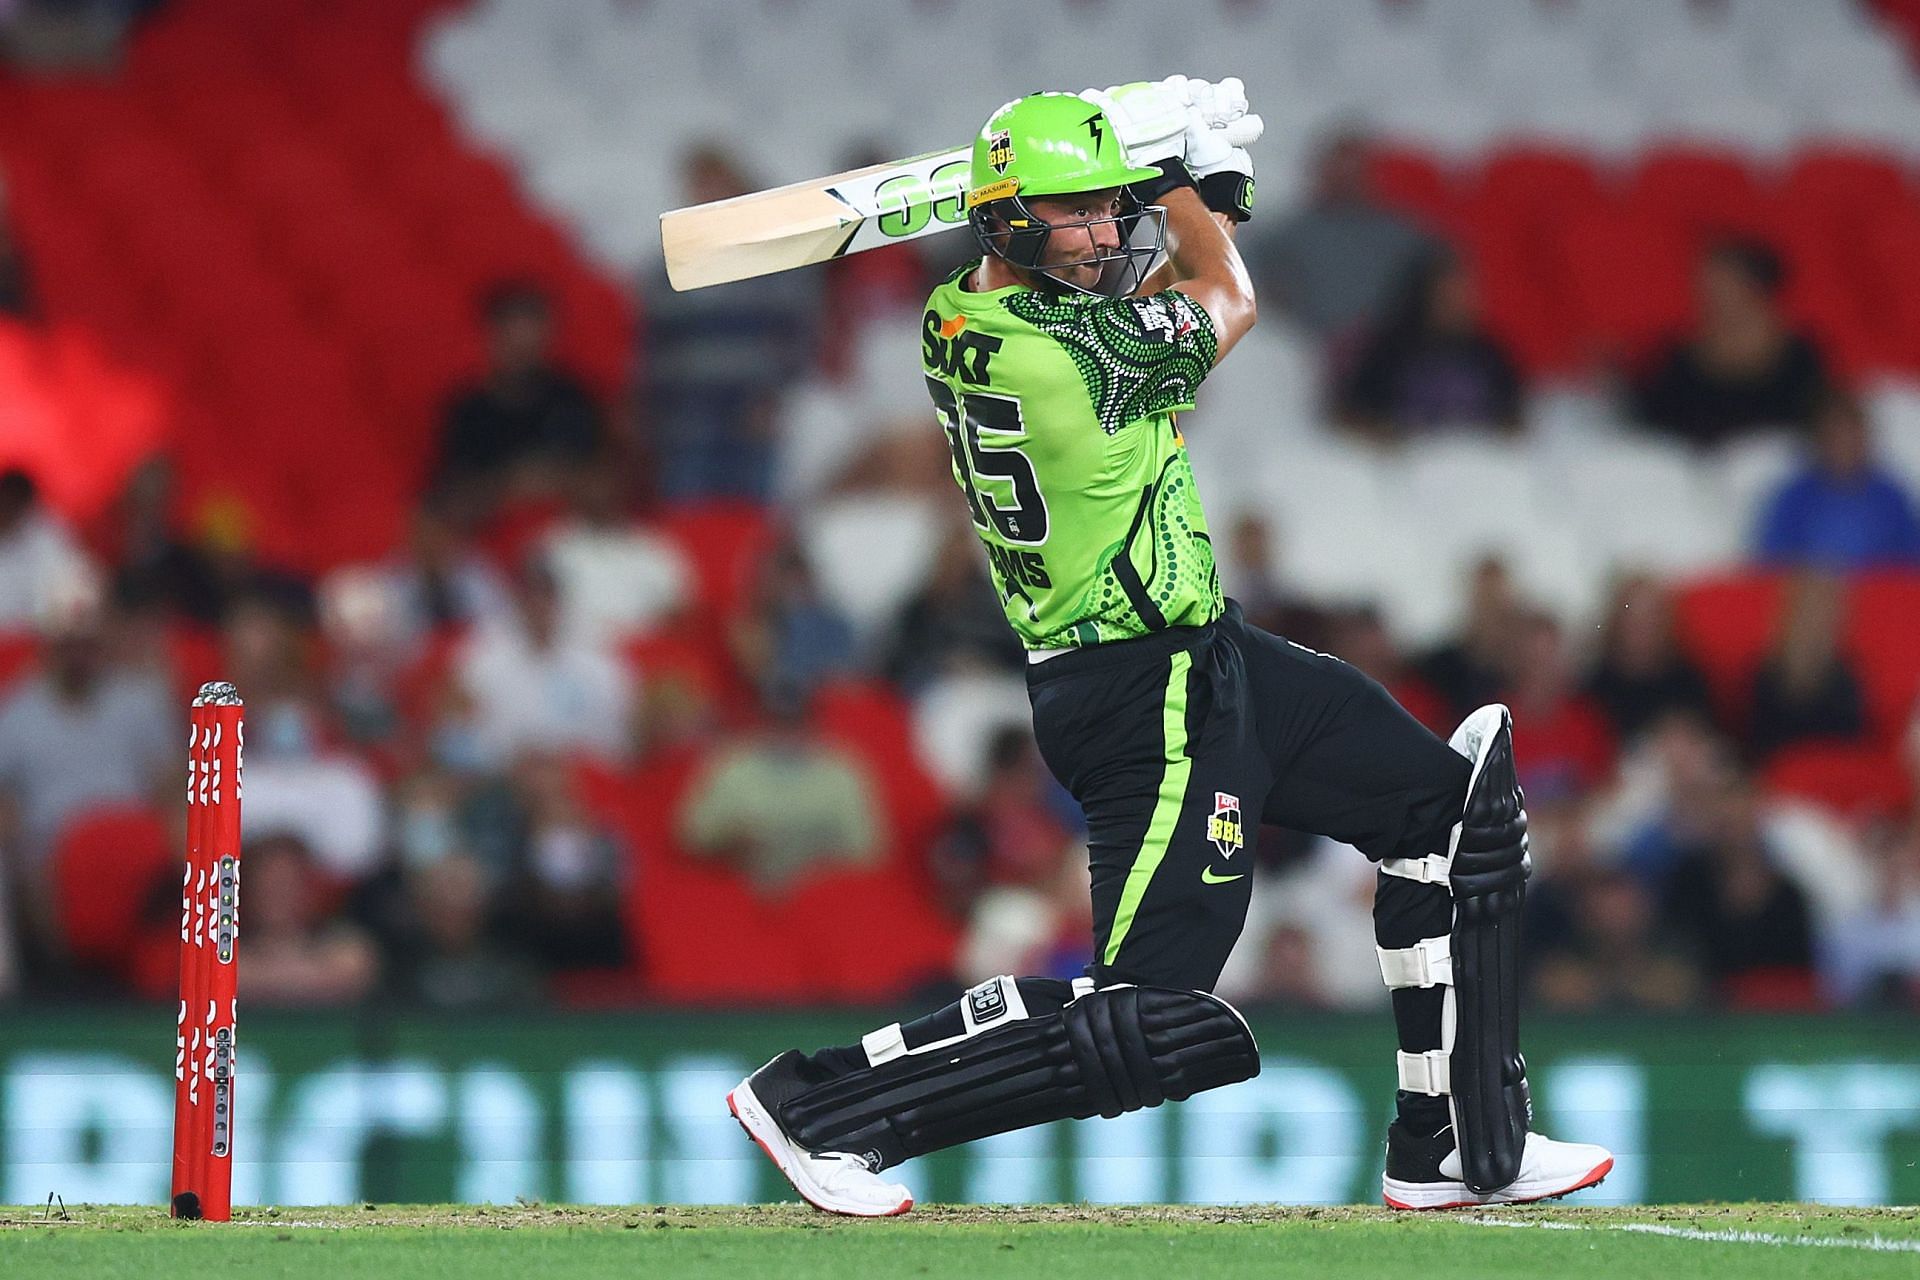 Daniel Sams batting in the BBL. Pic: Getty Images